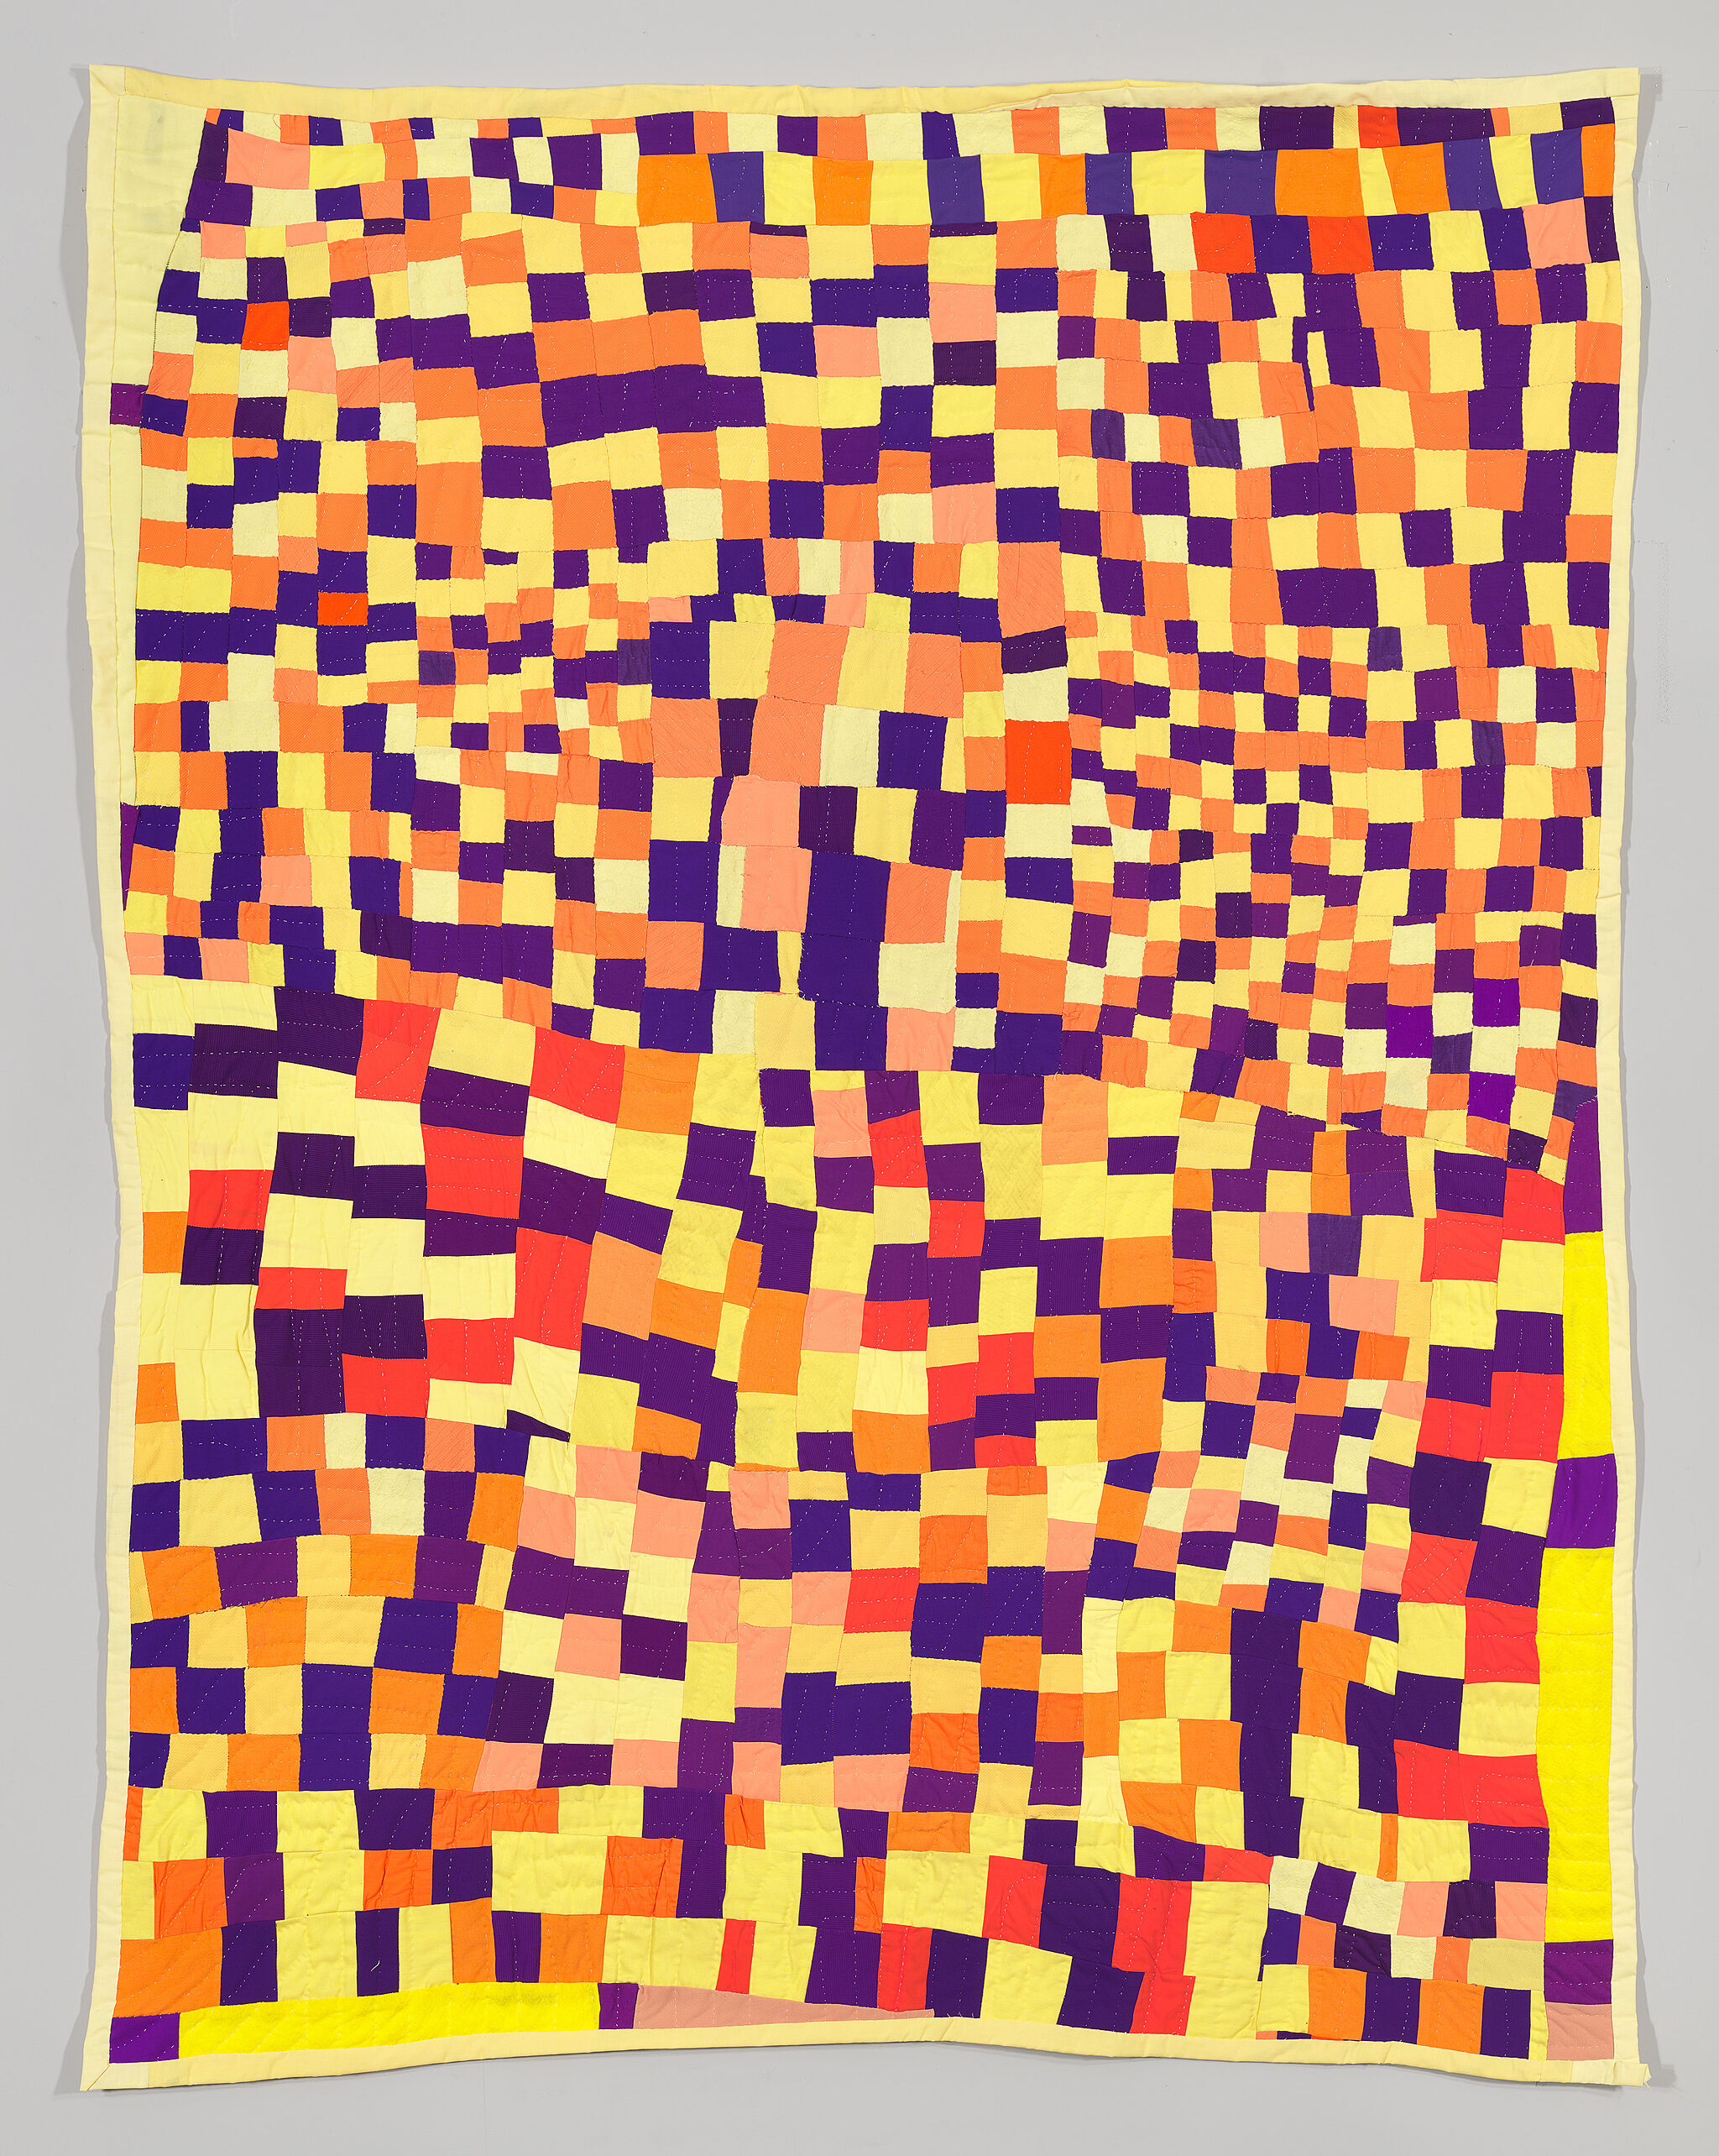 A quilt composed of squares of varying sizes and colors